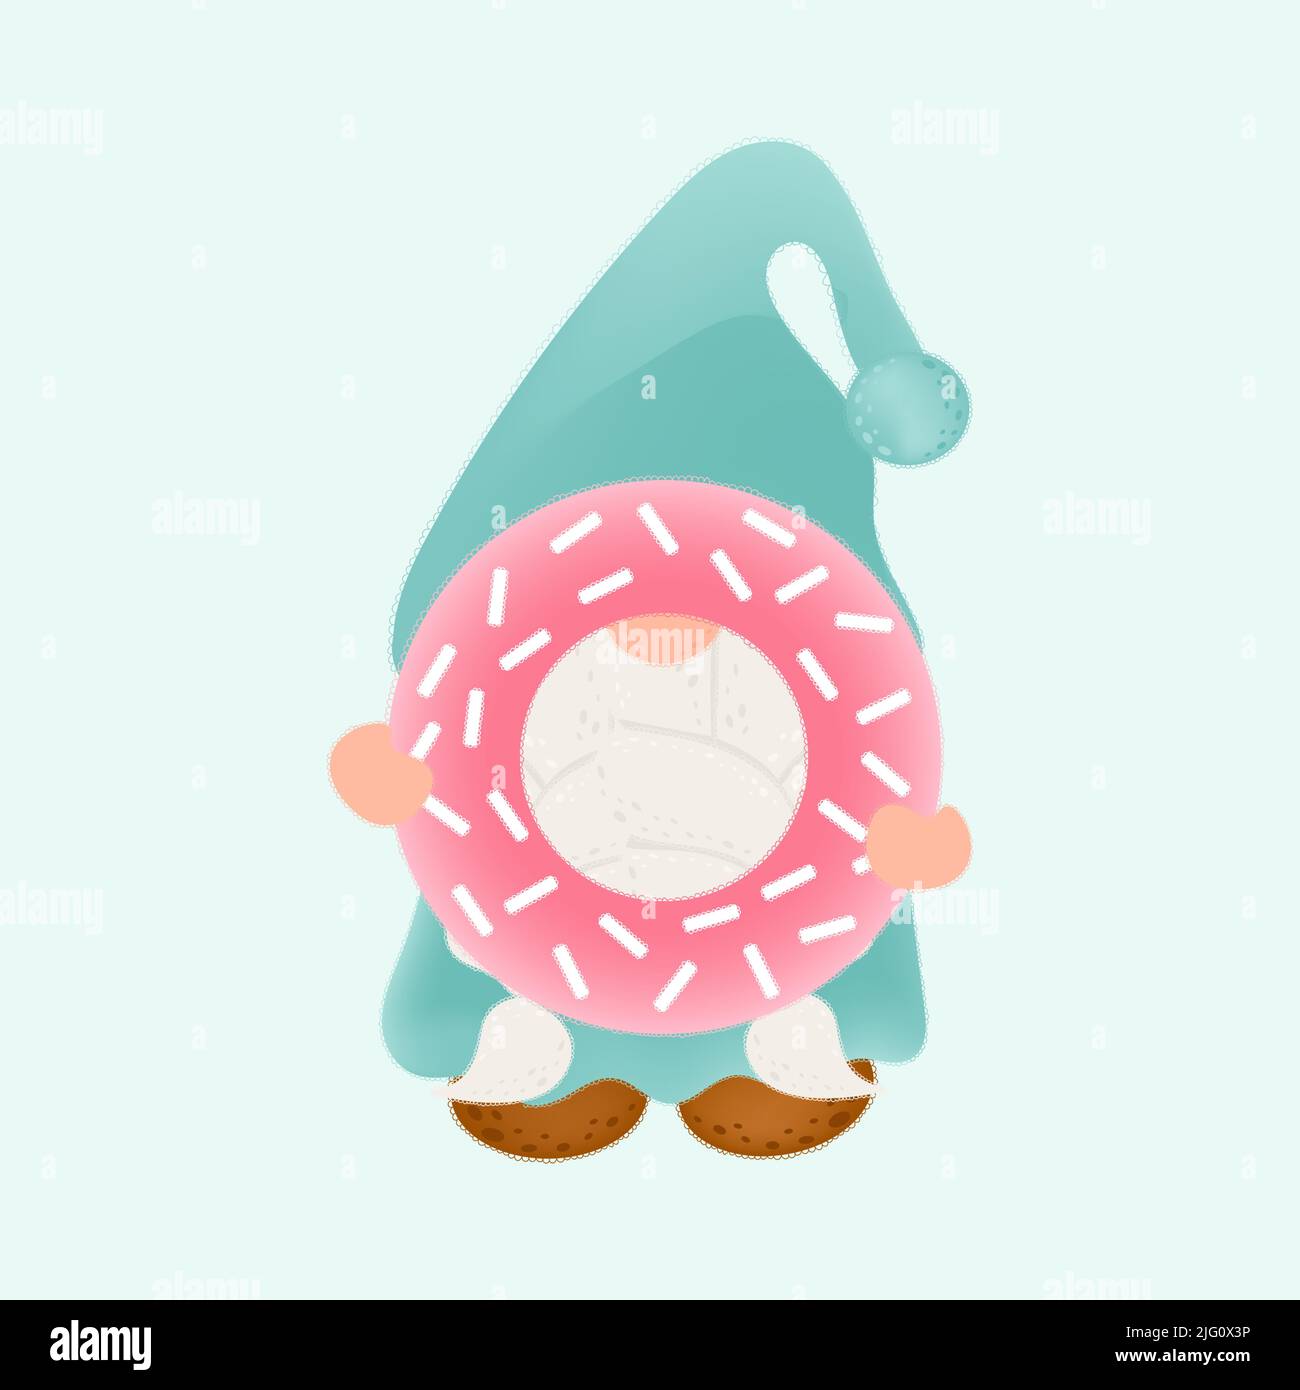 Cute Gnome Clipart for Kids Holidays and Goods. Happy Clip Art Gnome with a Big Donut. Vector Illustration of a Character for Stickers, Prints for Stock Vector